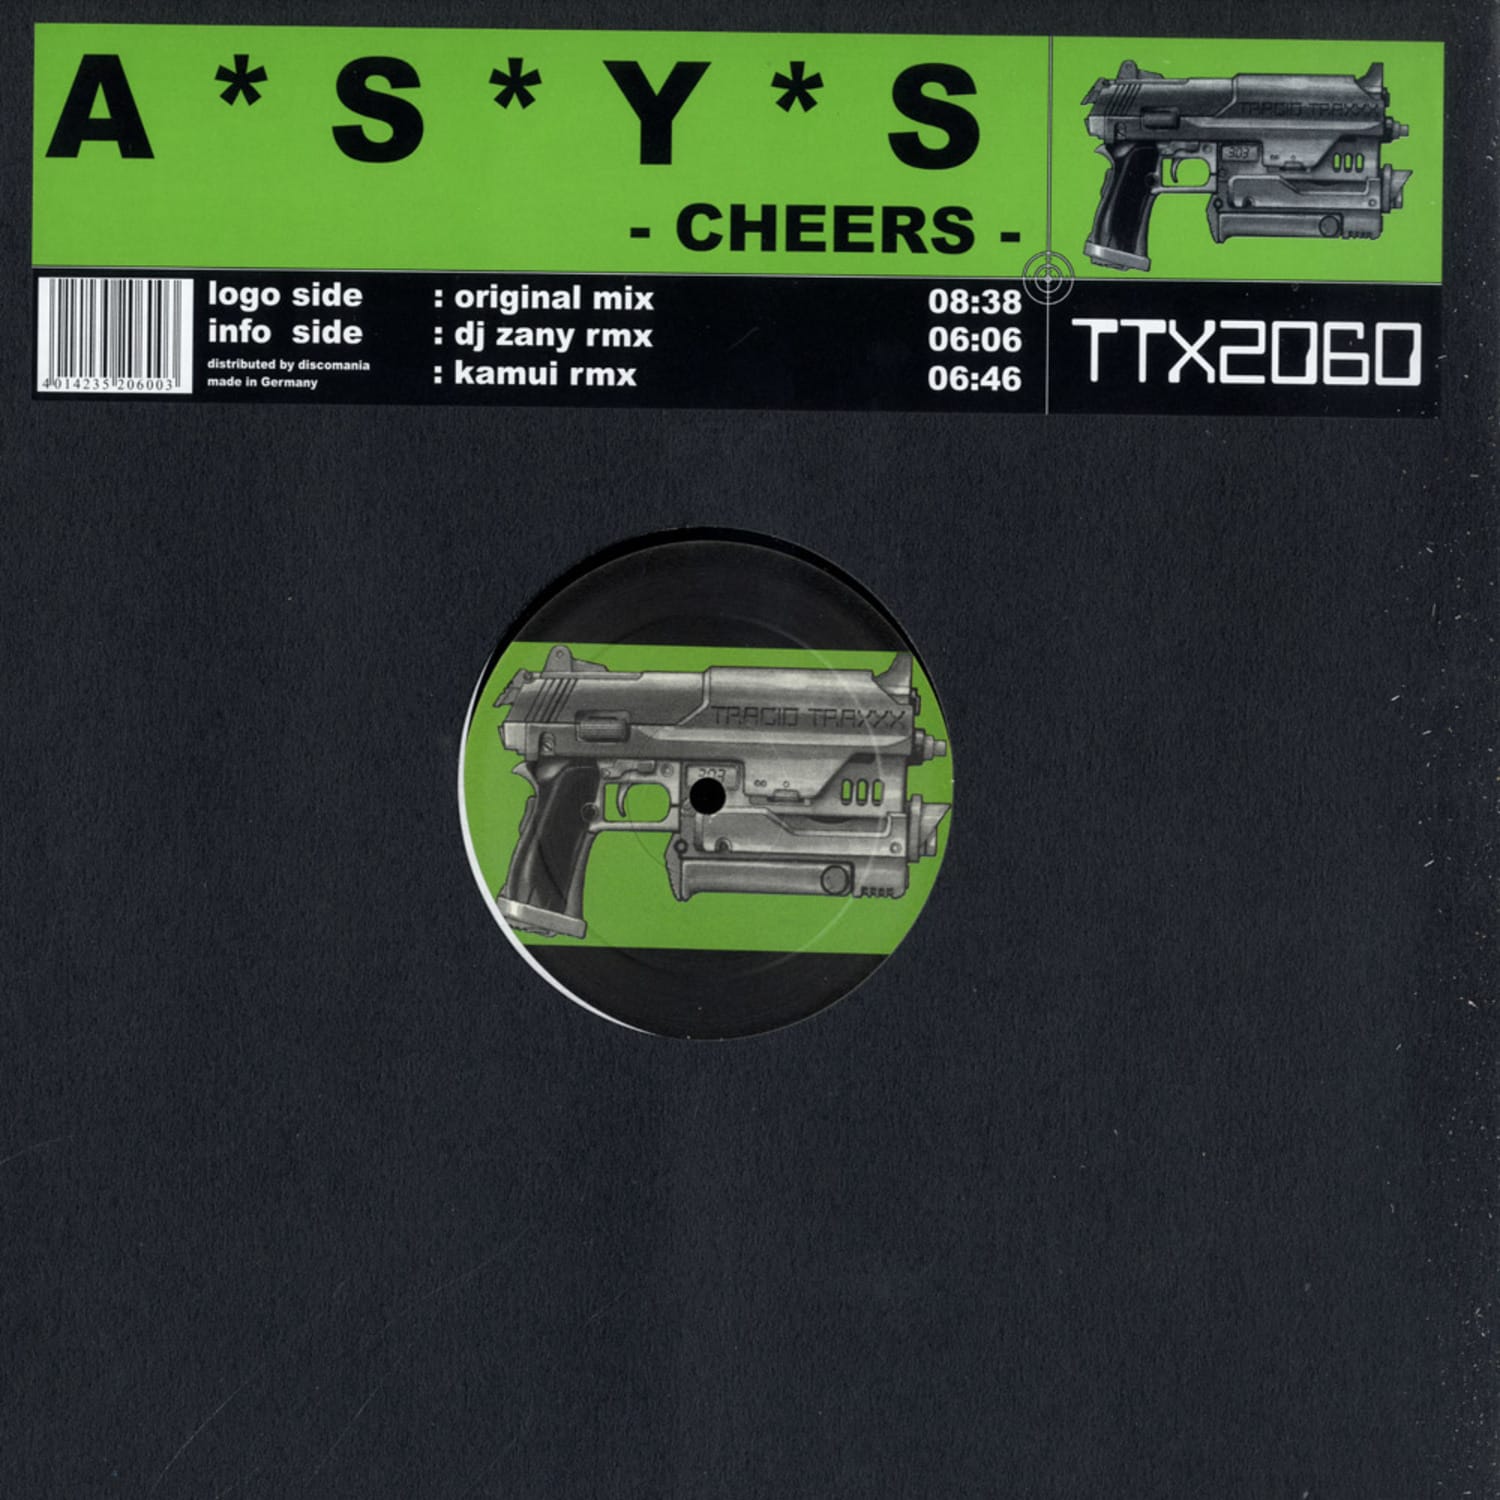 Asys - CHEERS